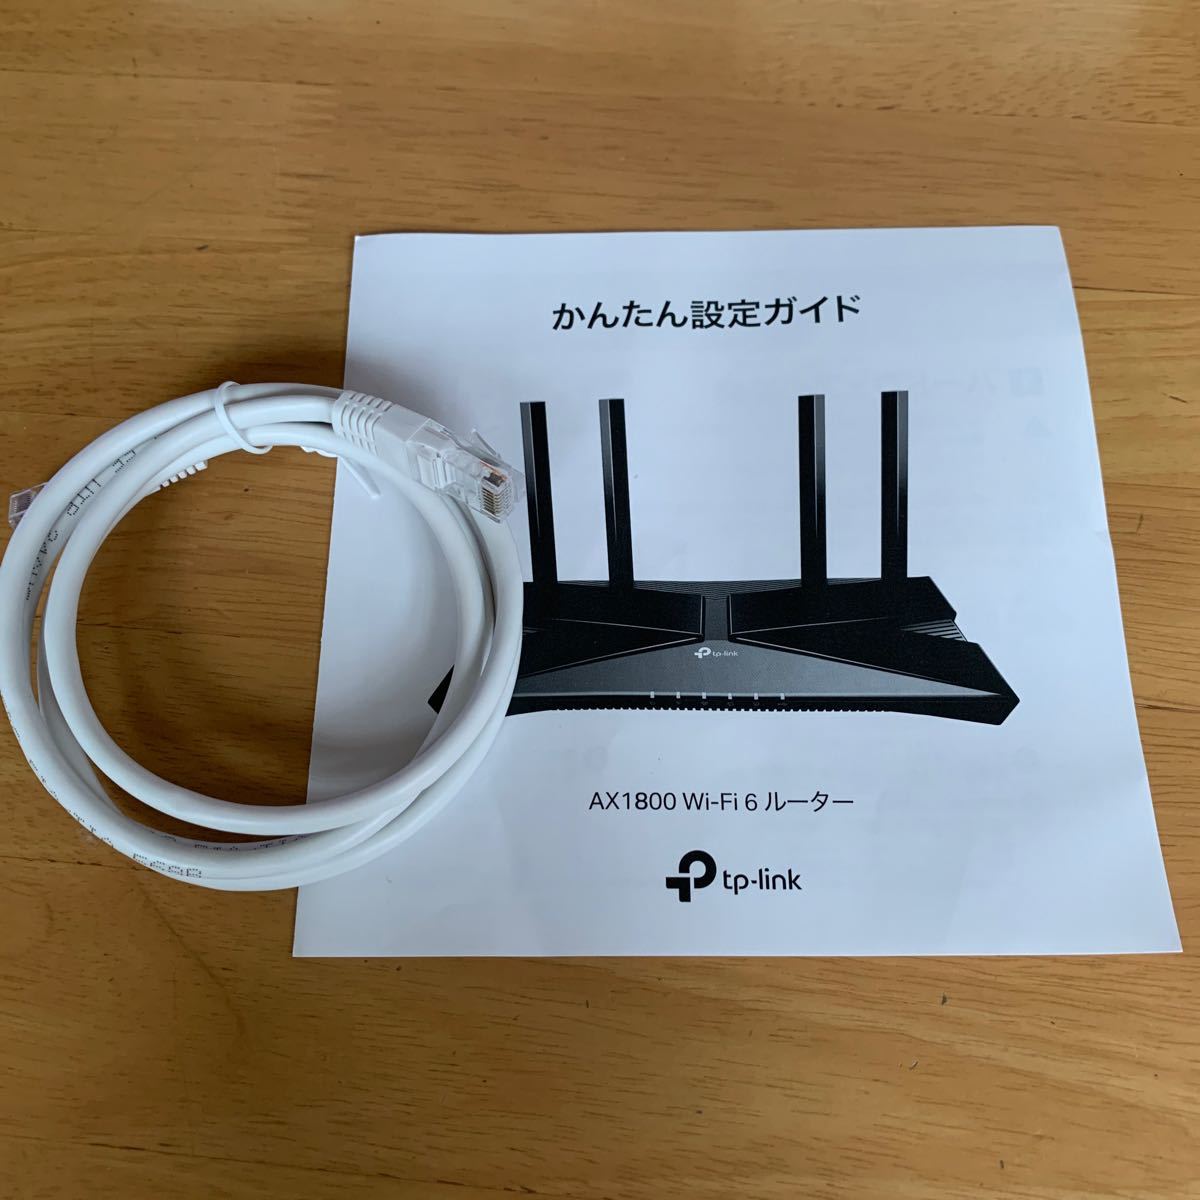 Wi-Fi6 ルーター　tp-link